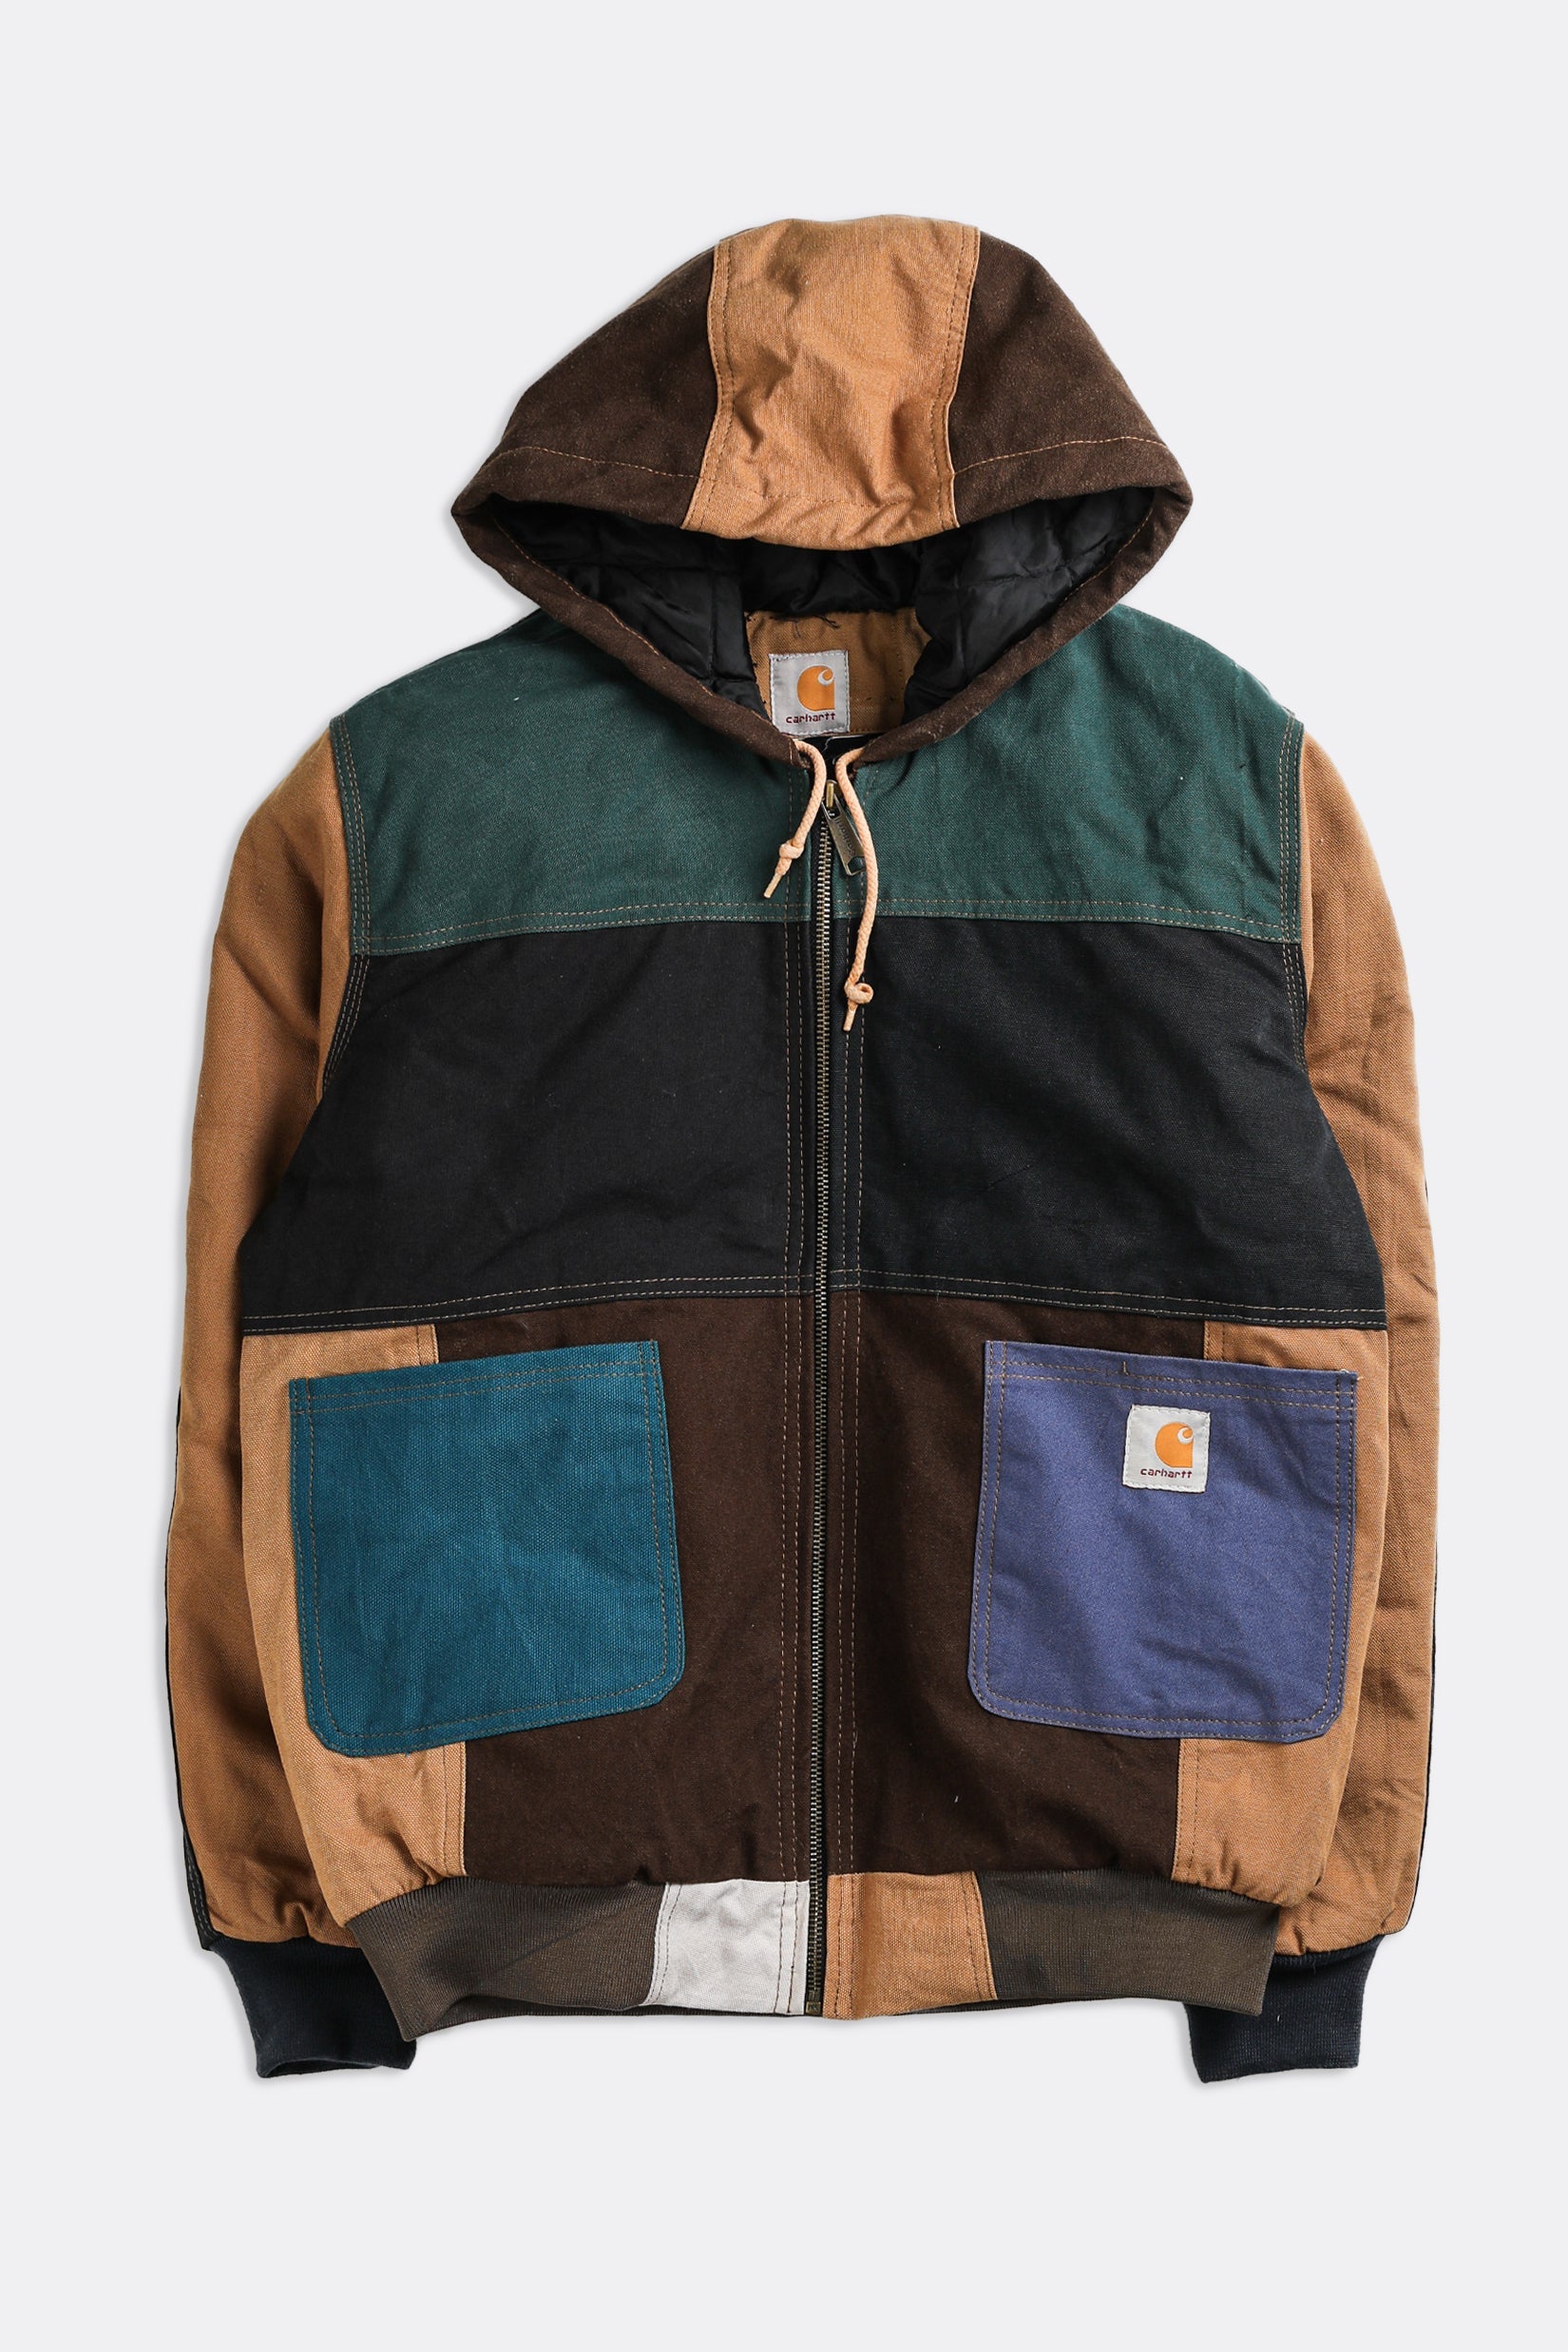 Introducing the new Rework Carhartt Patch Jacket◽️Every jacket is 1 of 1  with unique canvas patches